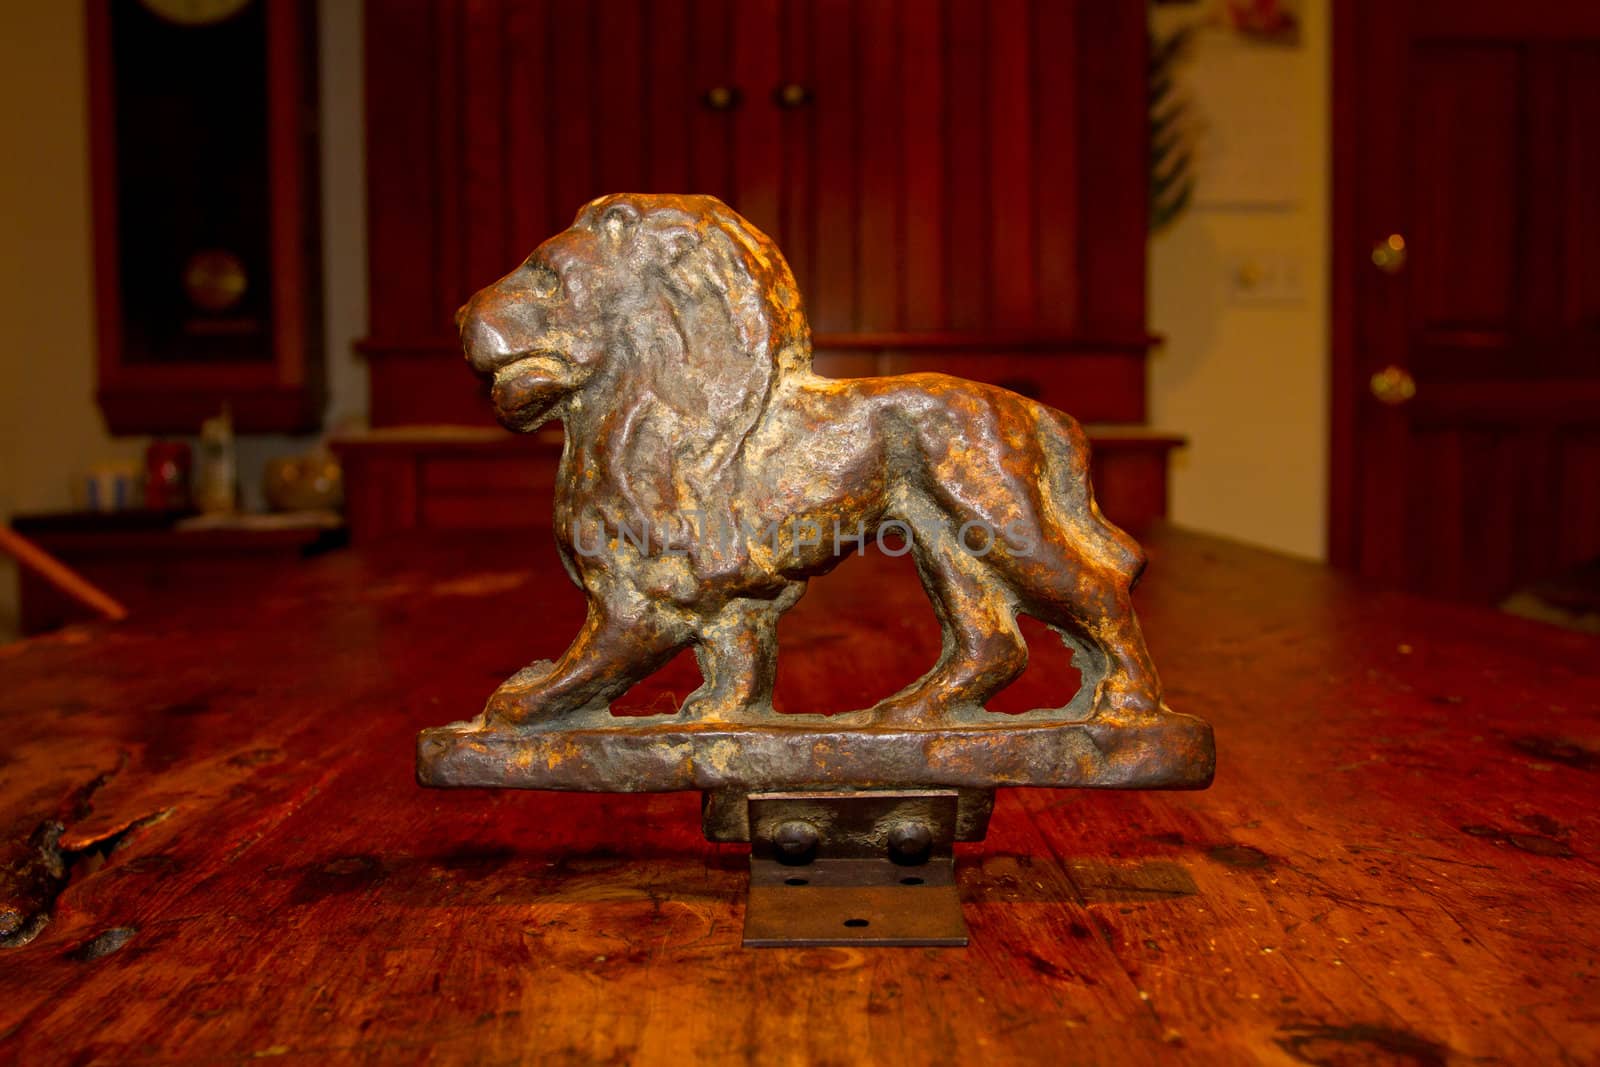 An antique bronze lion statue photographed on an old wooden table.